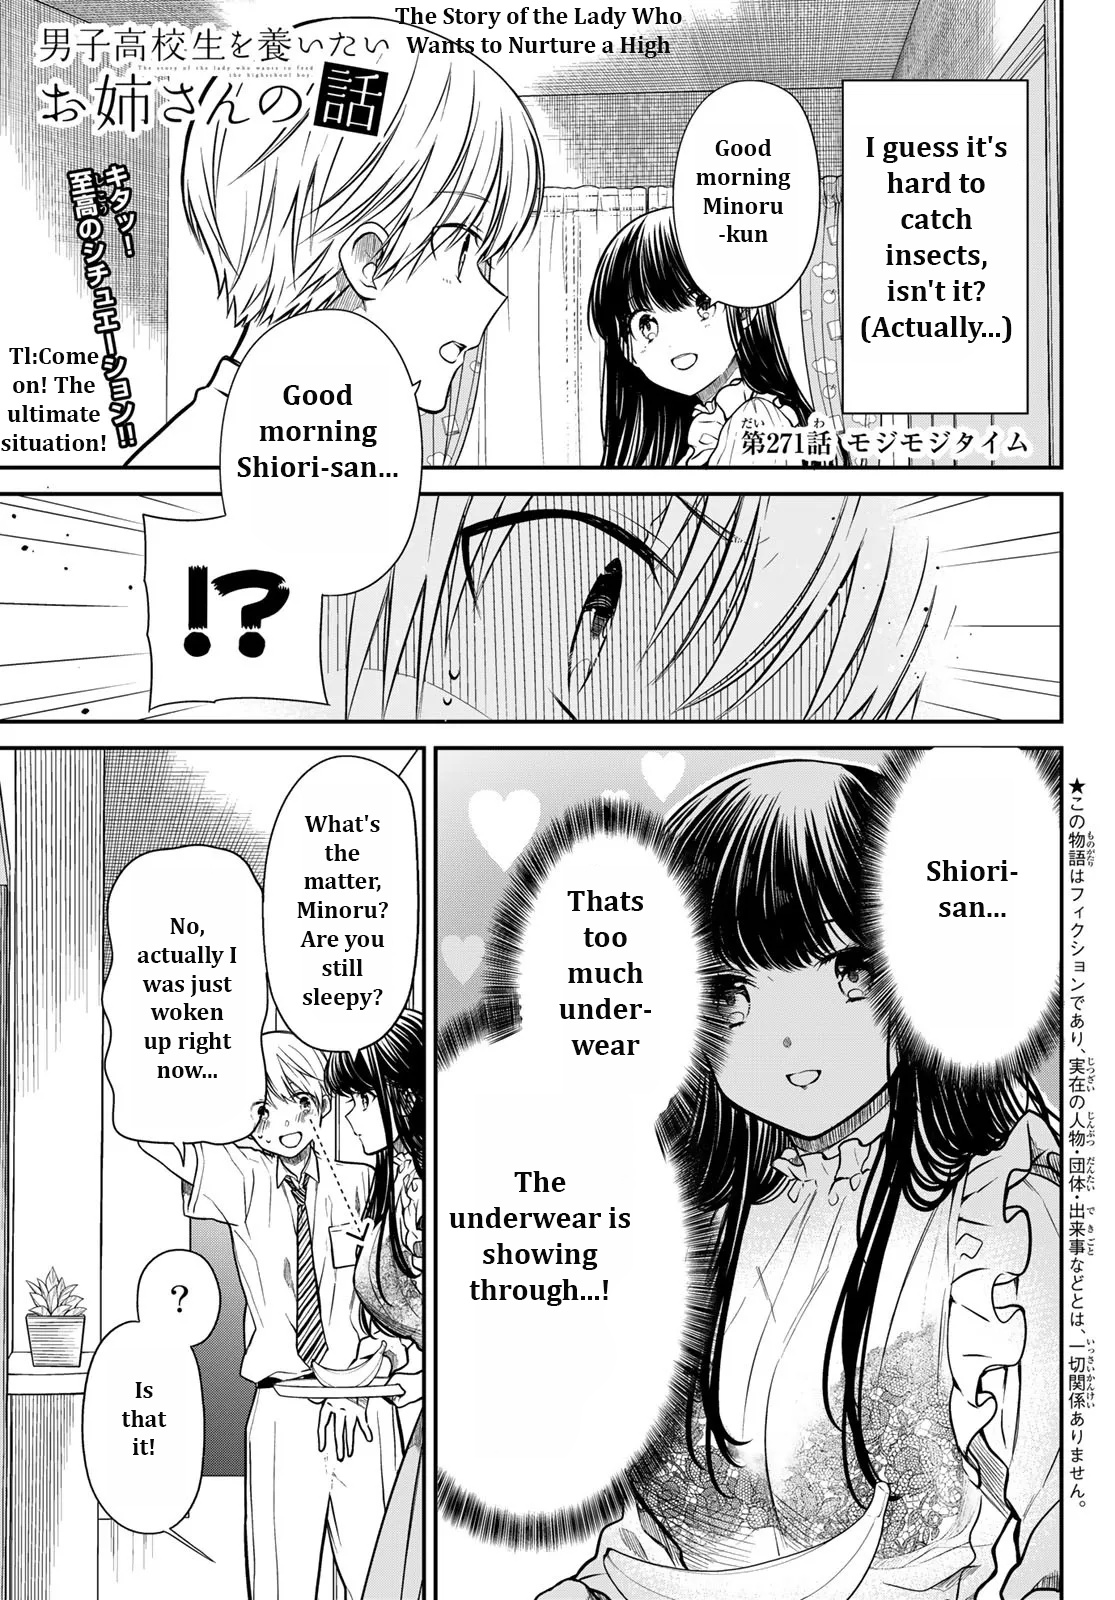 The Story Of An Onee-San Who Wants To Keep A High School Boy - Page 1